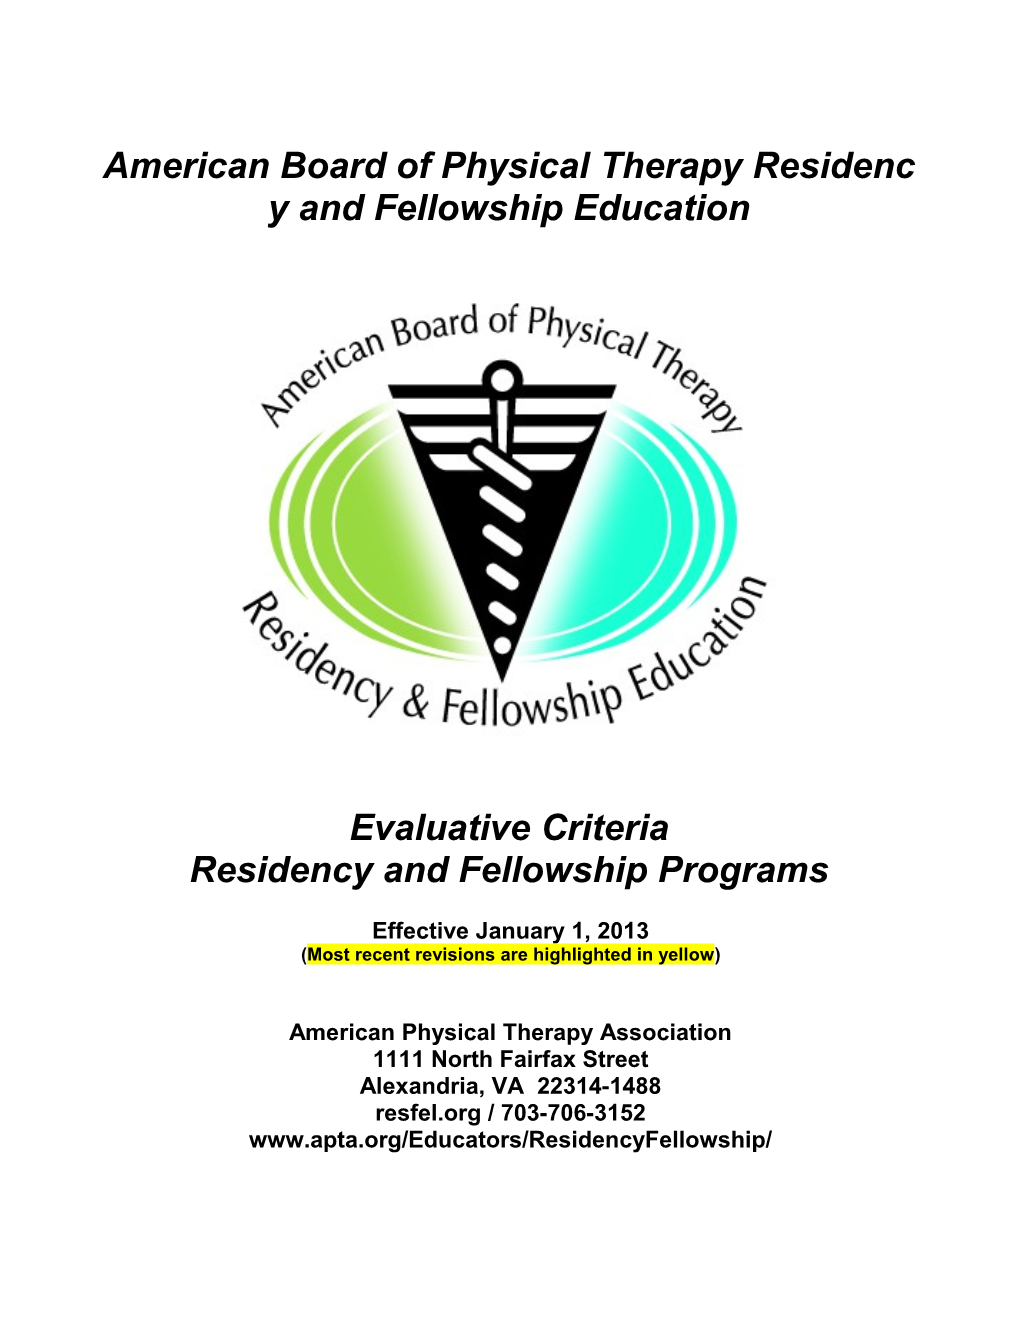 American Board of Physical Therapy Residency and Fellowship Education